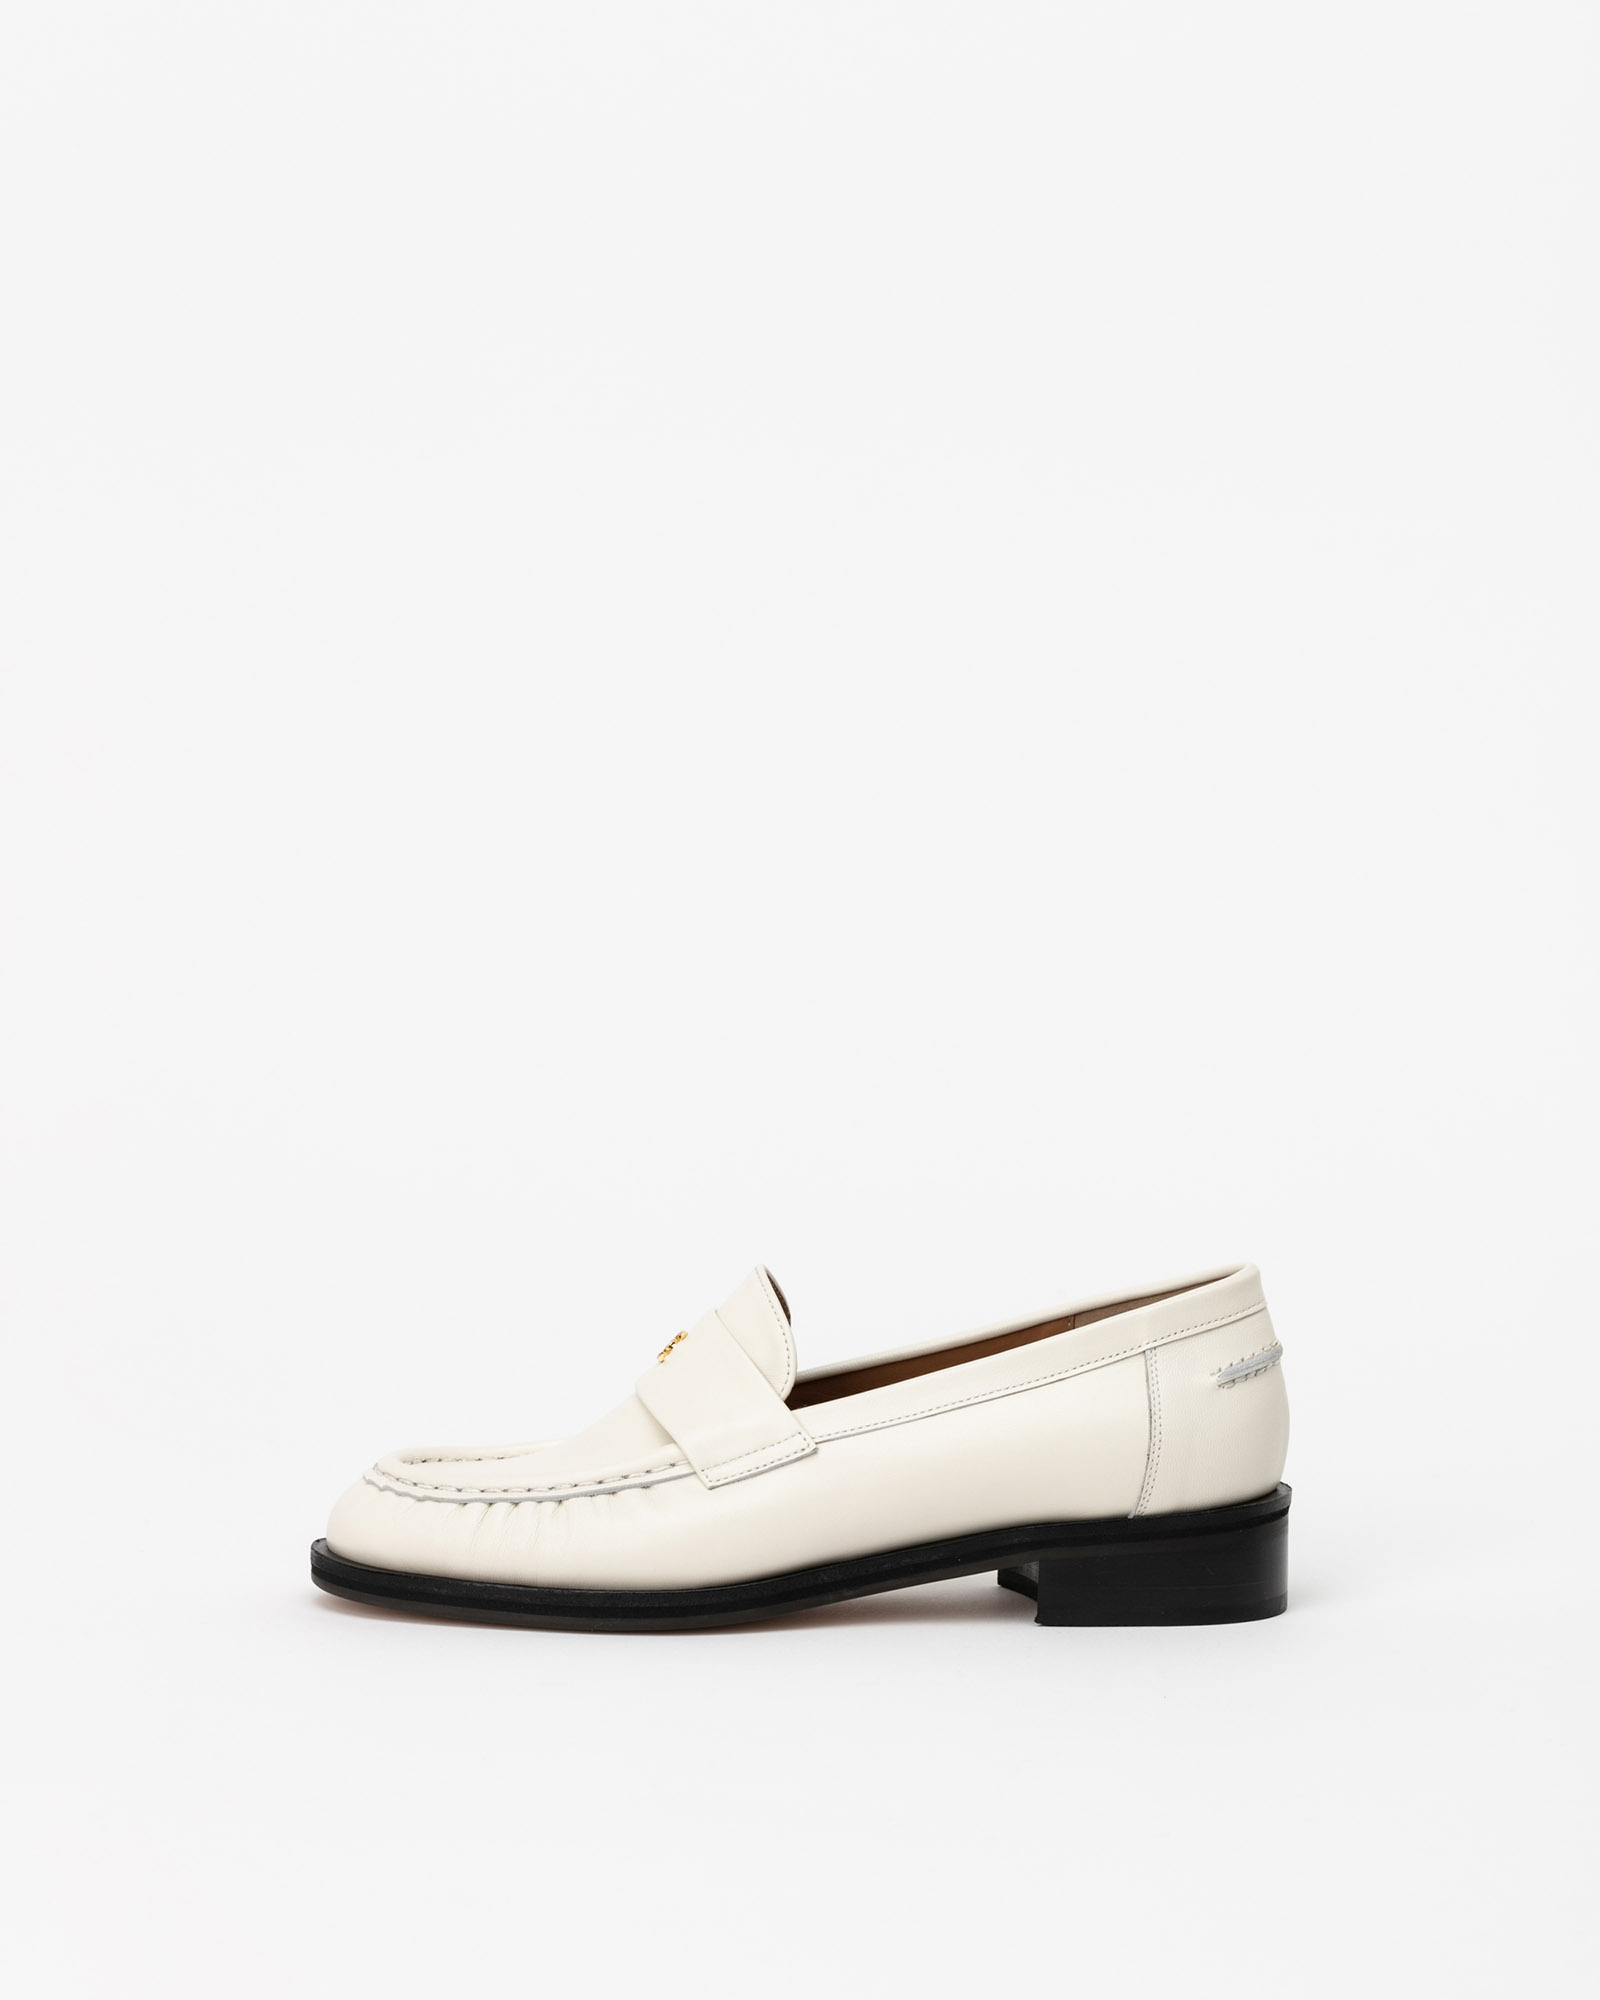 CL Soft Loafers in Ivory